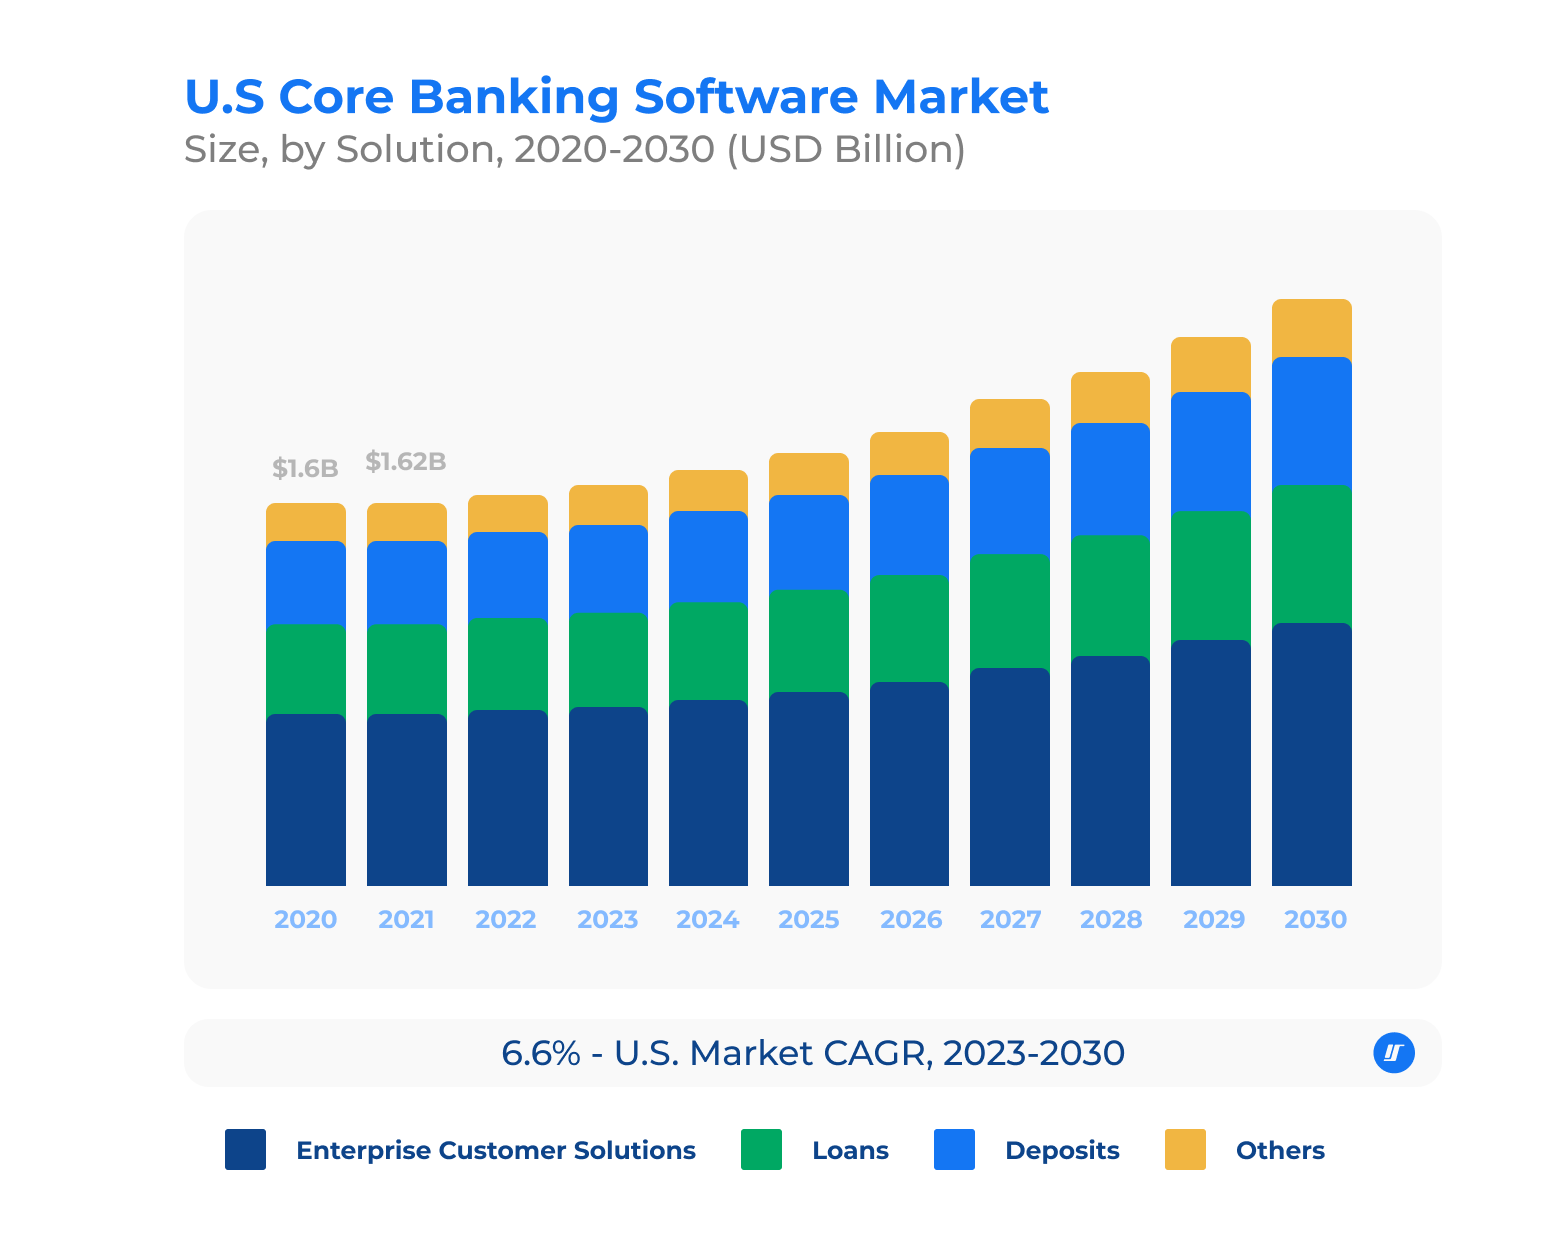 Graph of the US core banking software market size by solution, in 2020-2030 (USD billion)